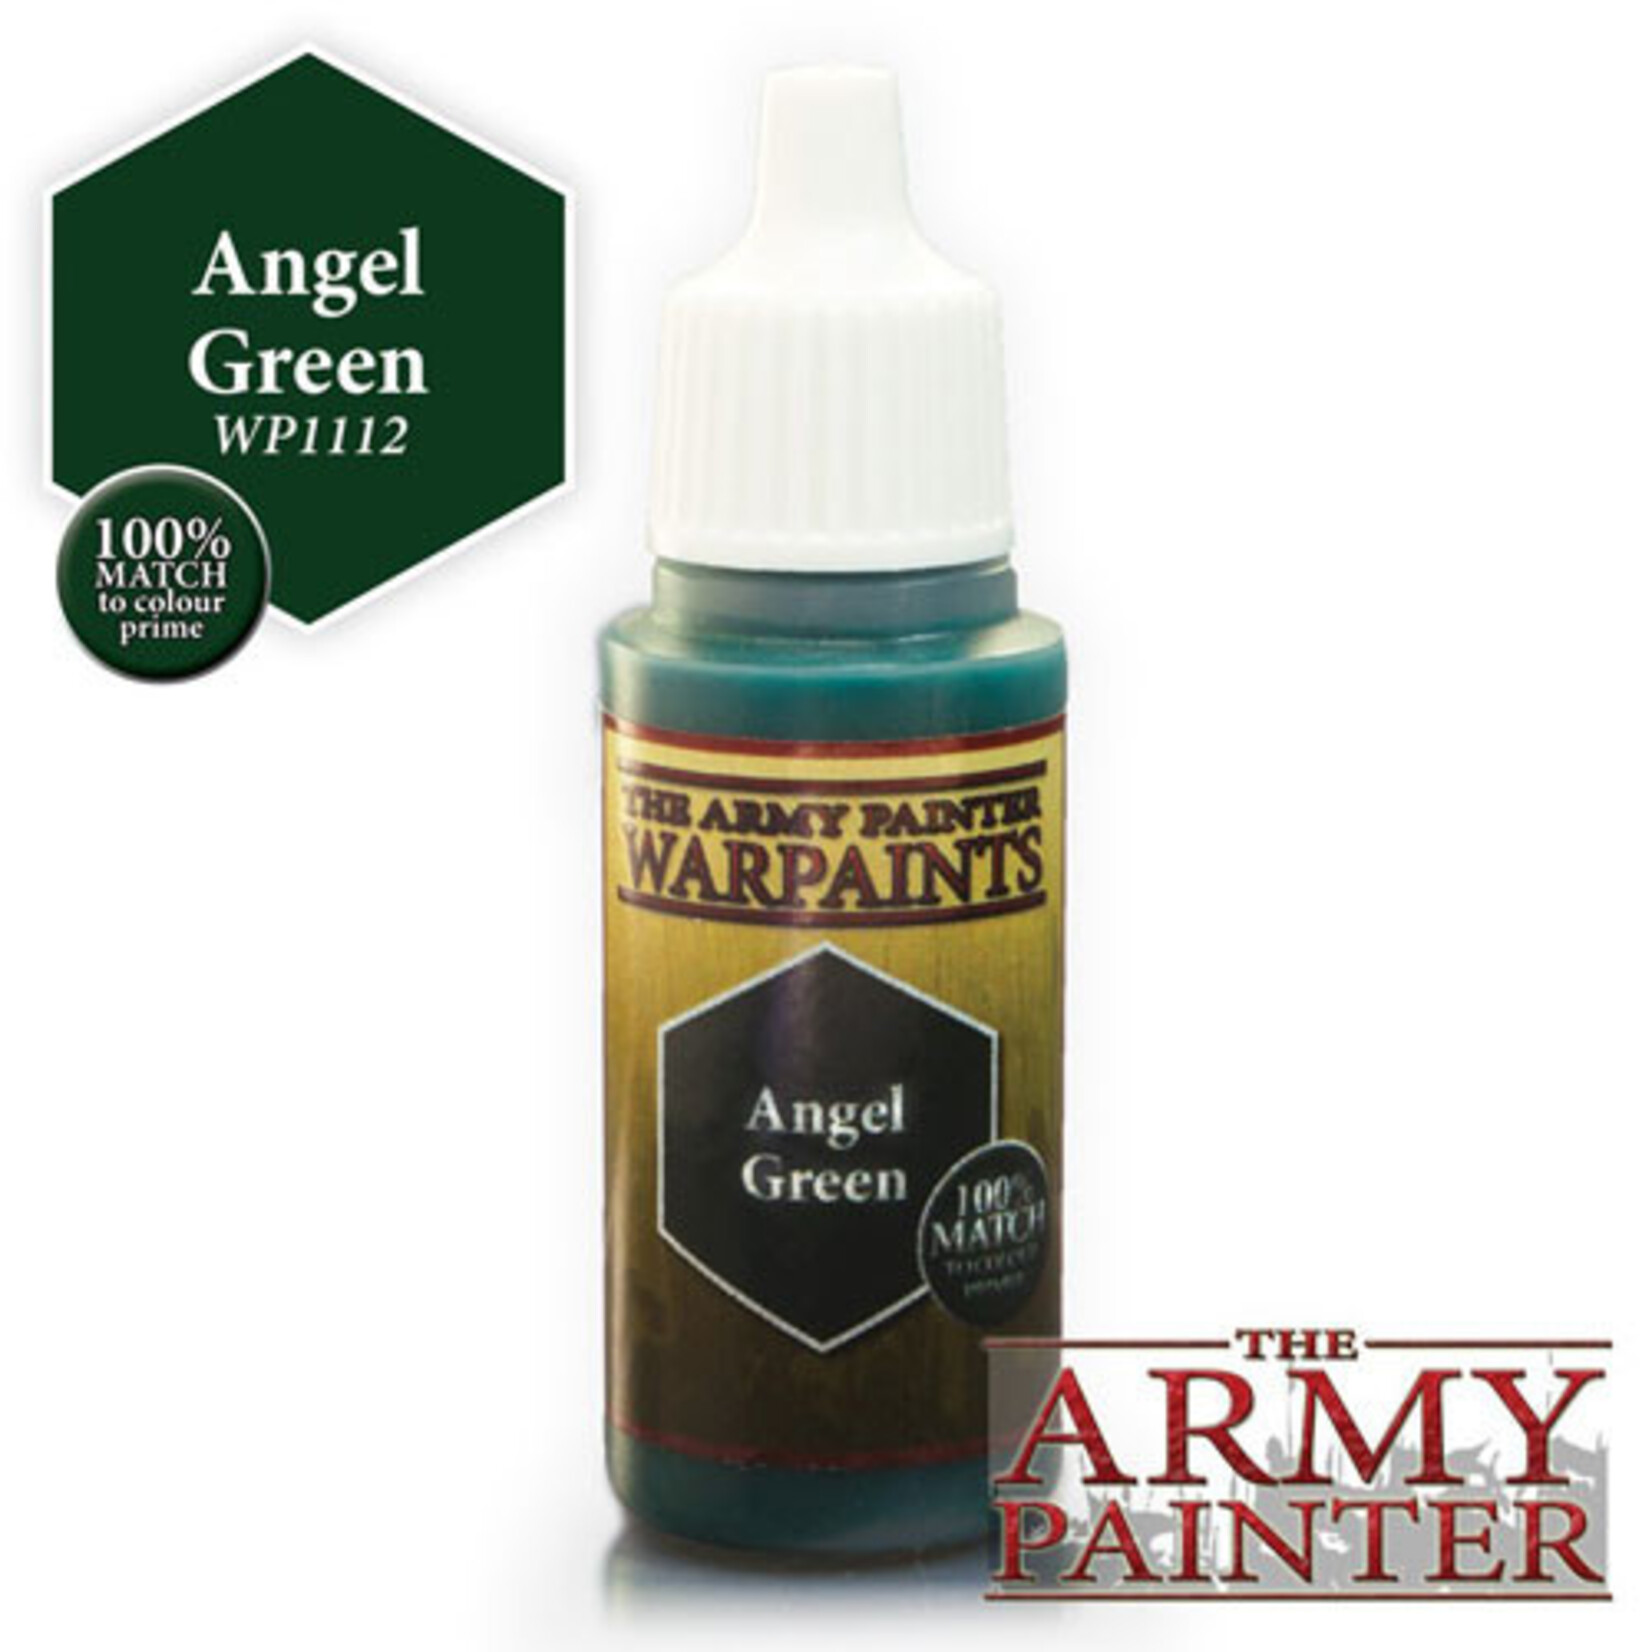 The Army Painter Warpaints: Angel Green 18ml